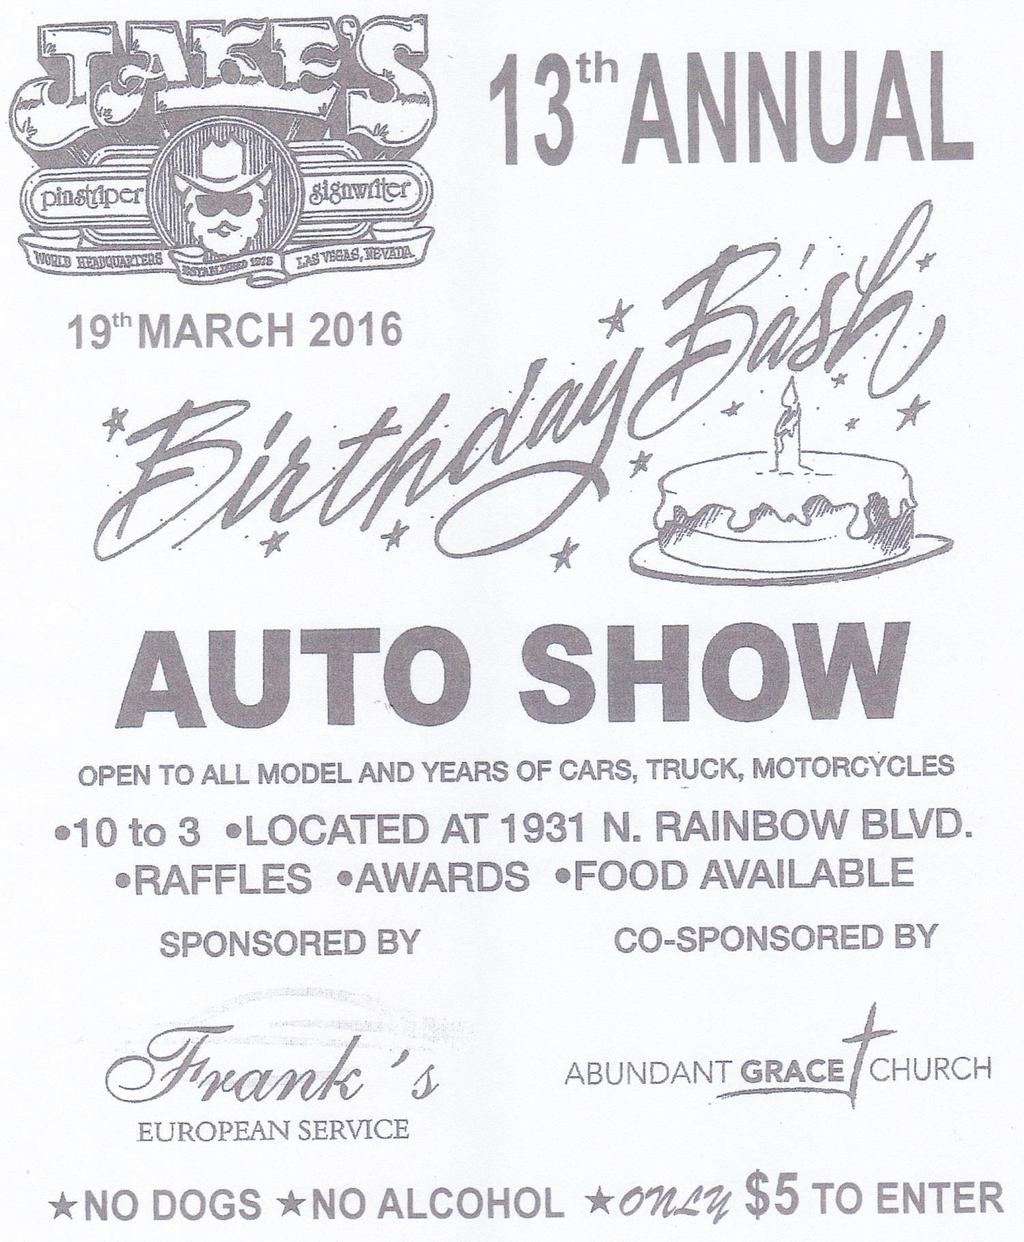 MARCH 2016 - SCHEDULE OF EVENTS Continued : 19 Jake s 13 th Annual Birthday Bash Auto Show, 1931 N. Rainbow Blvd. 10am-3pm. Open to all model & years vehicles.